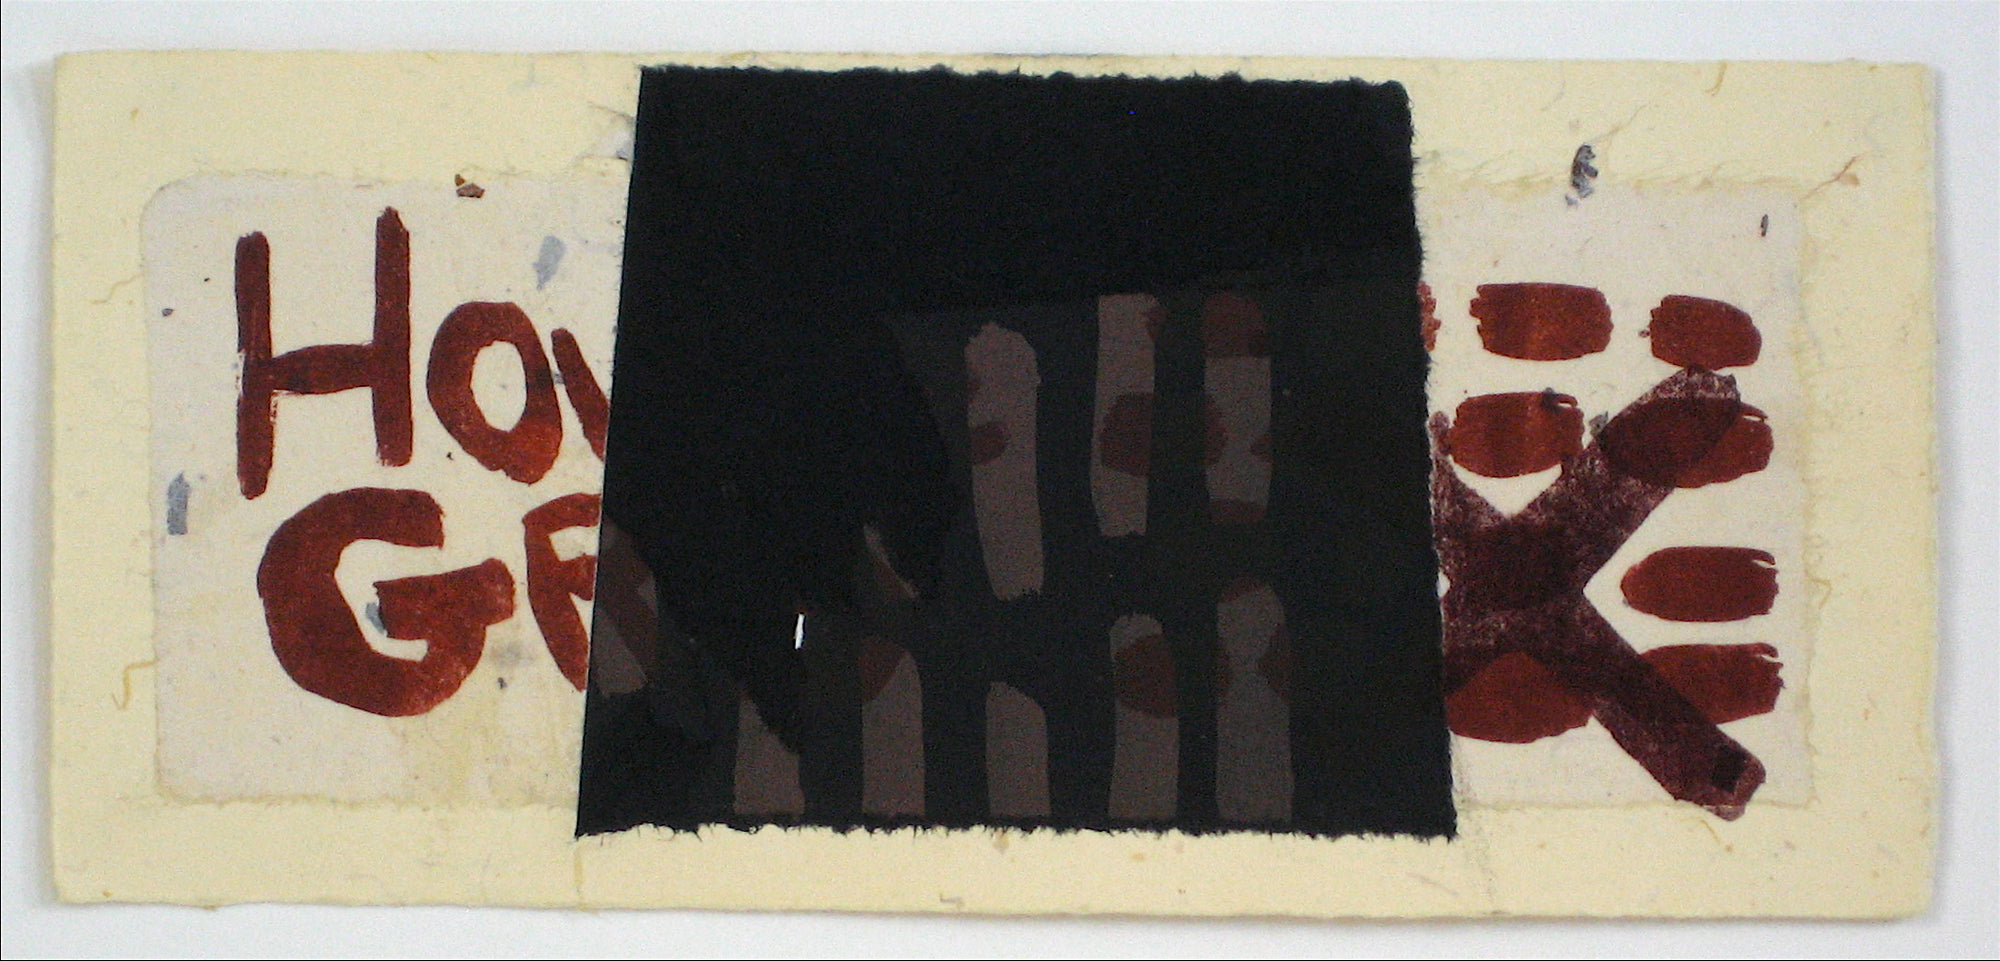 <i>House of Cards Series</i>, Abstracted Graphic Block <br>1997 Lithograph <br><br>#11686